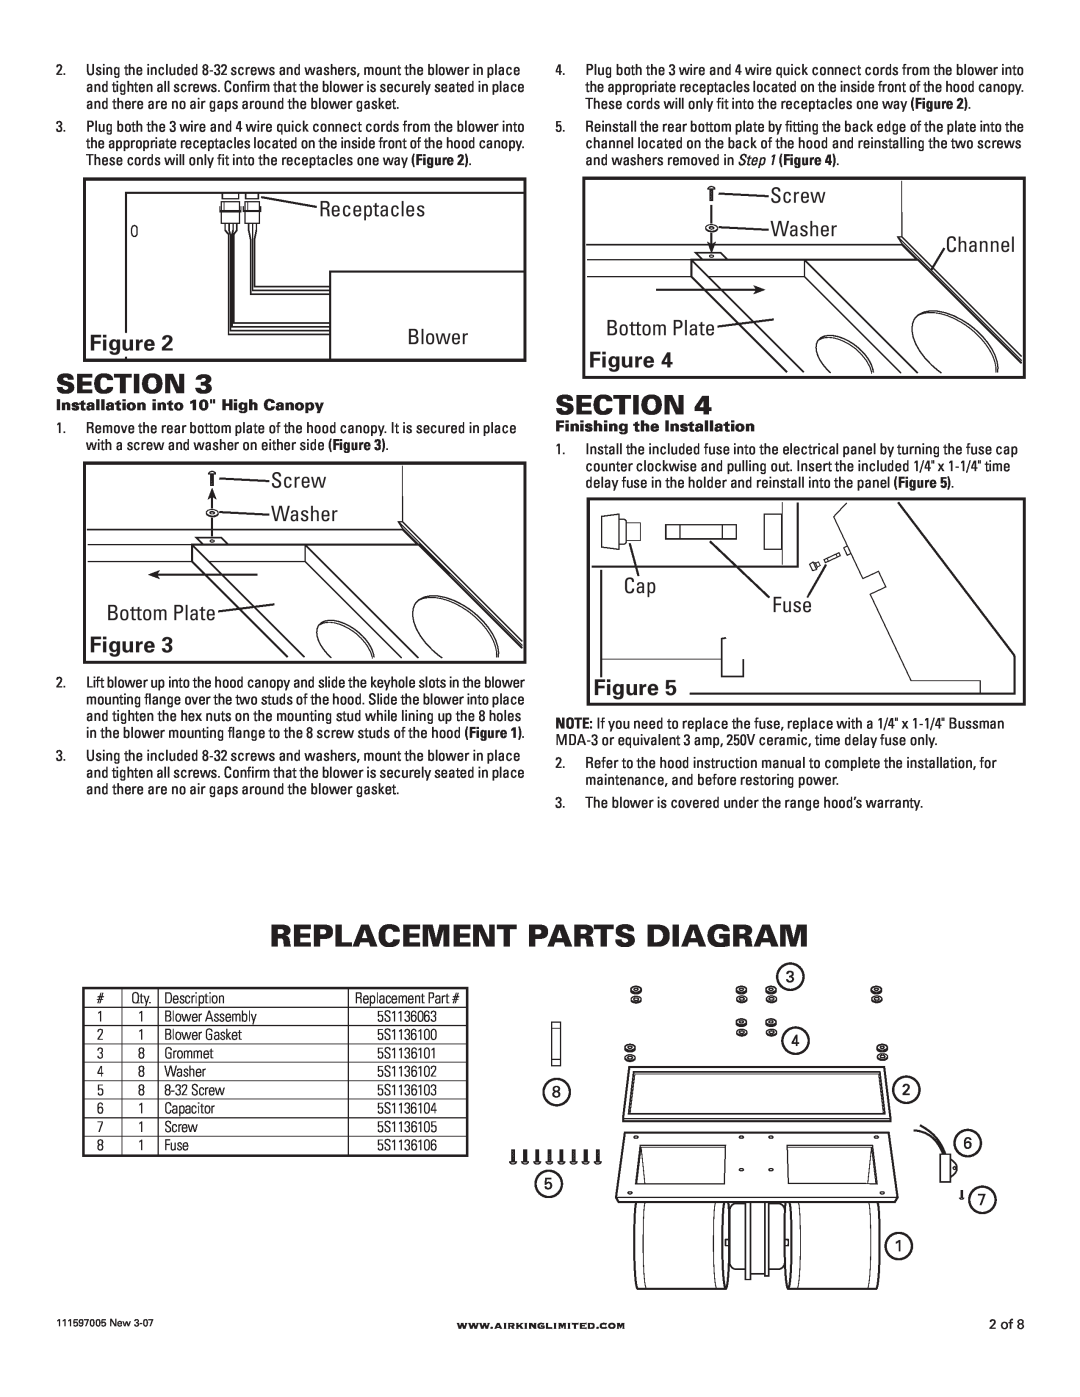 Air King B600 installation instructions Replacement Parts Diagram, Section 